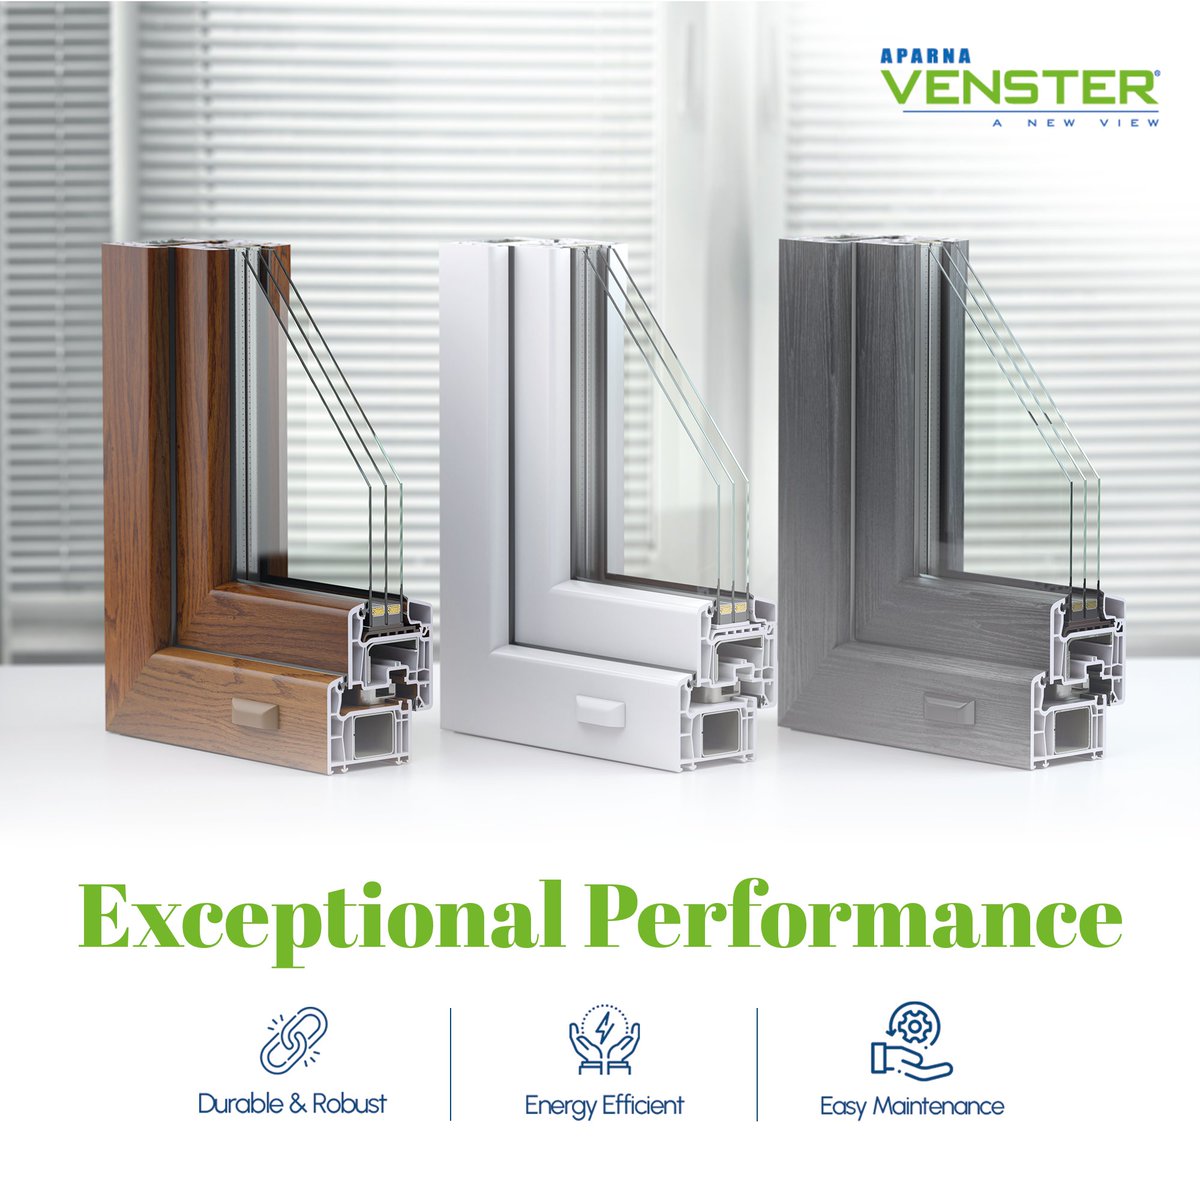 Upgrade your home's energy efficiency and security with Venster uPVC windows and doors. Experience exceptional performance and durability.

#performance #durability #security #efficiency #robust #easymaintenance #energyefficient #upvcwindows #upvcdoors #upvc #venster